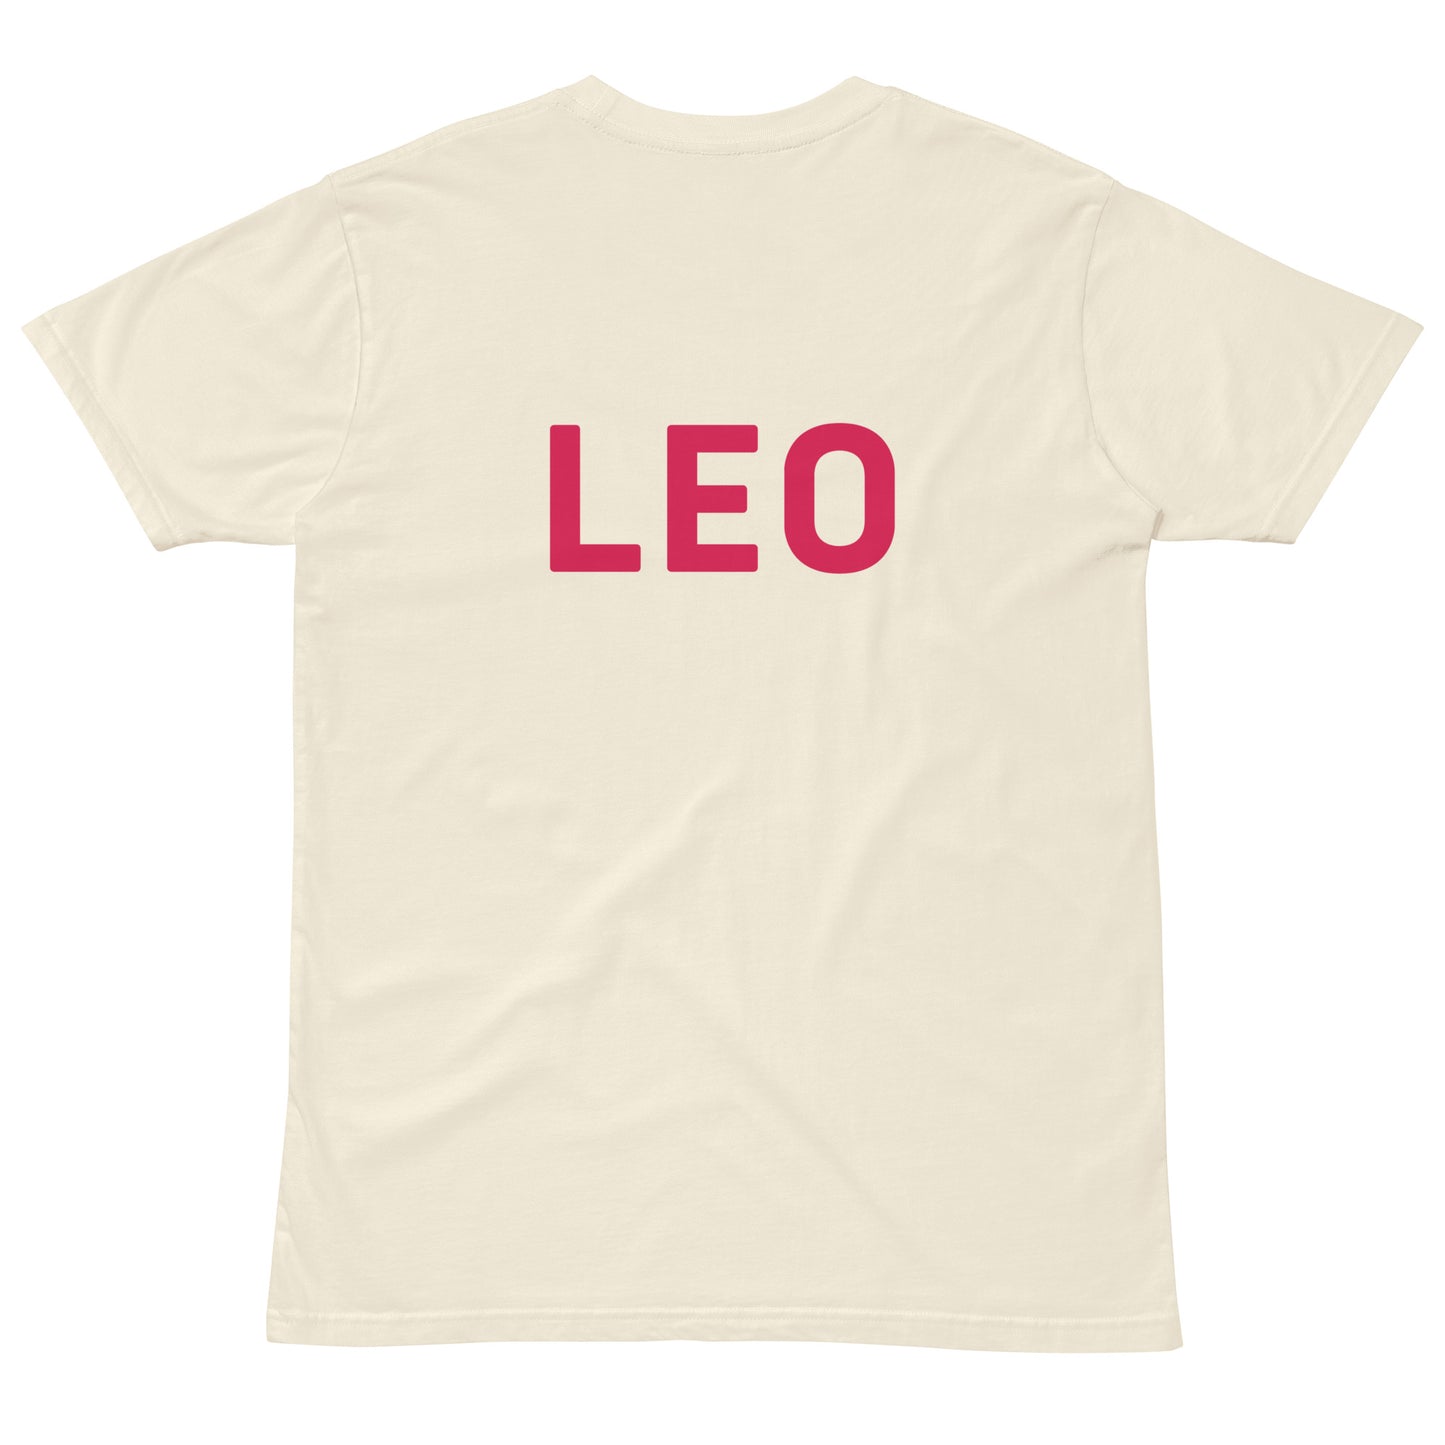 Be the Star You are! Leo Unisex premium t-shirt